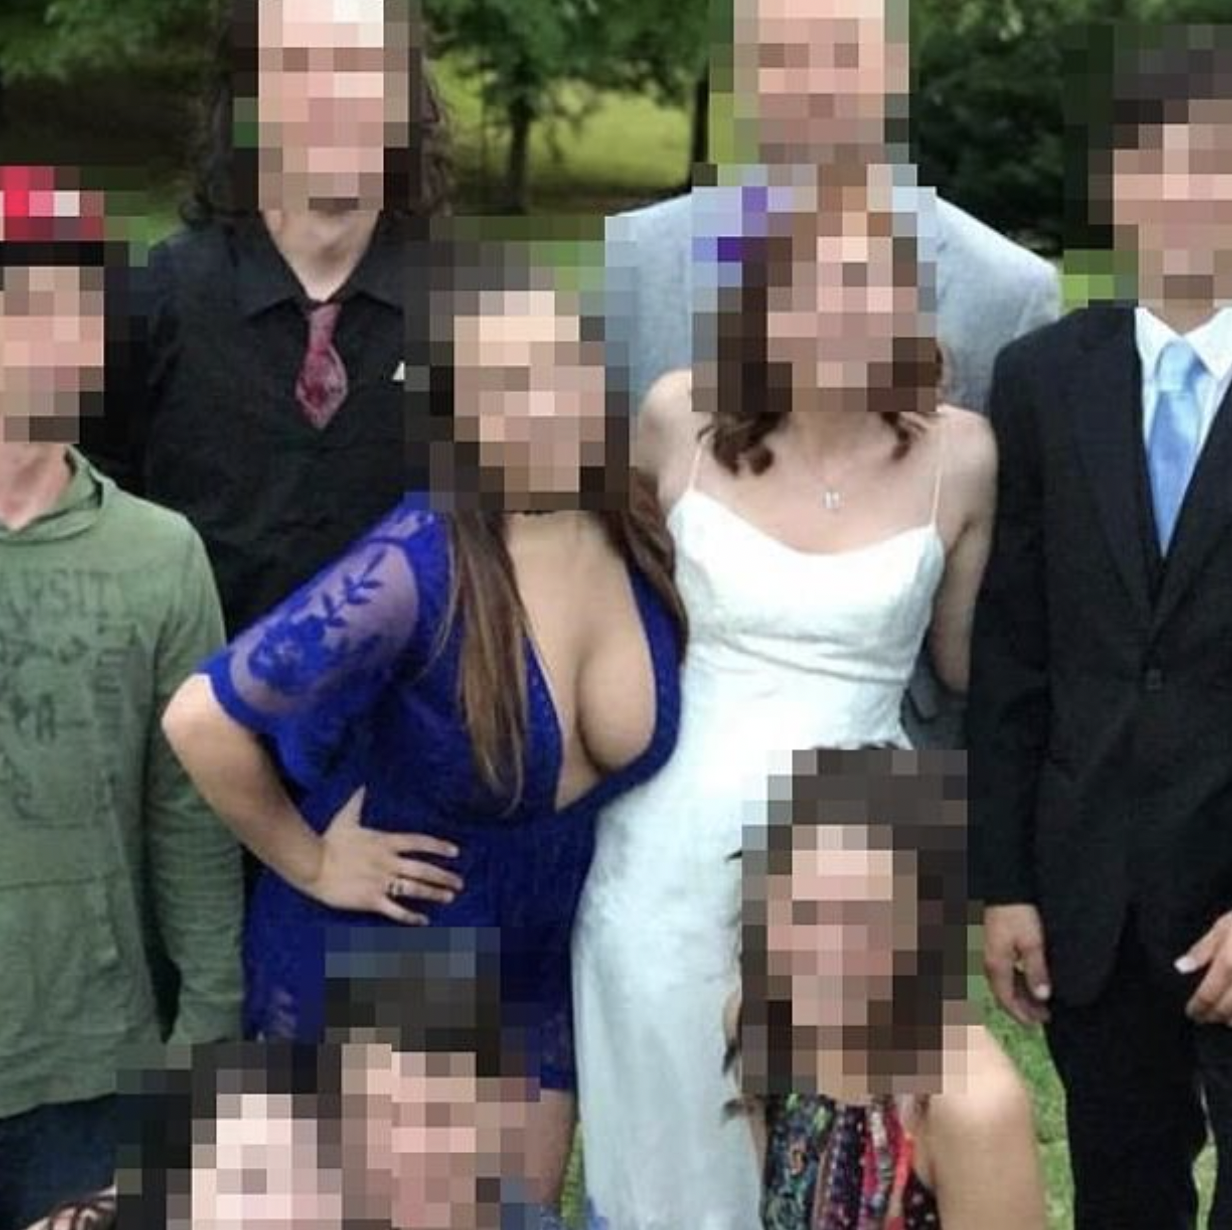 Wedding guest called "trashy" after stealing the limelight.